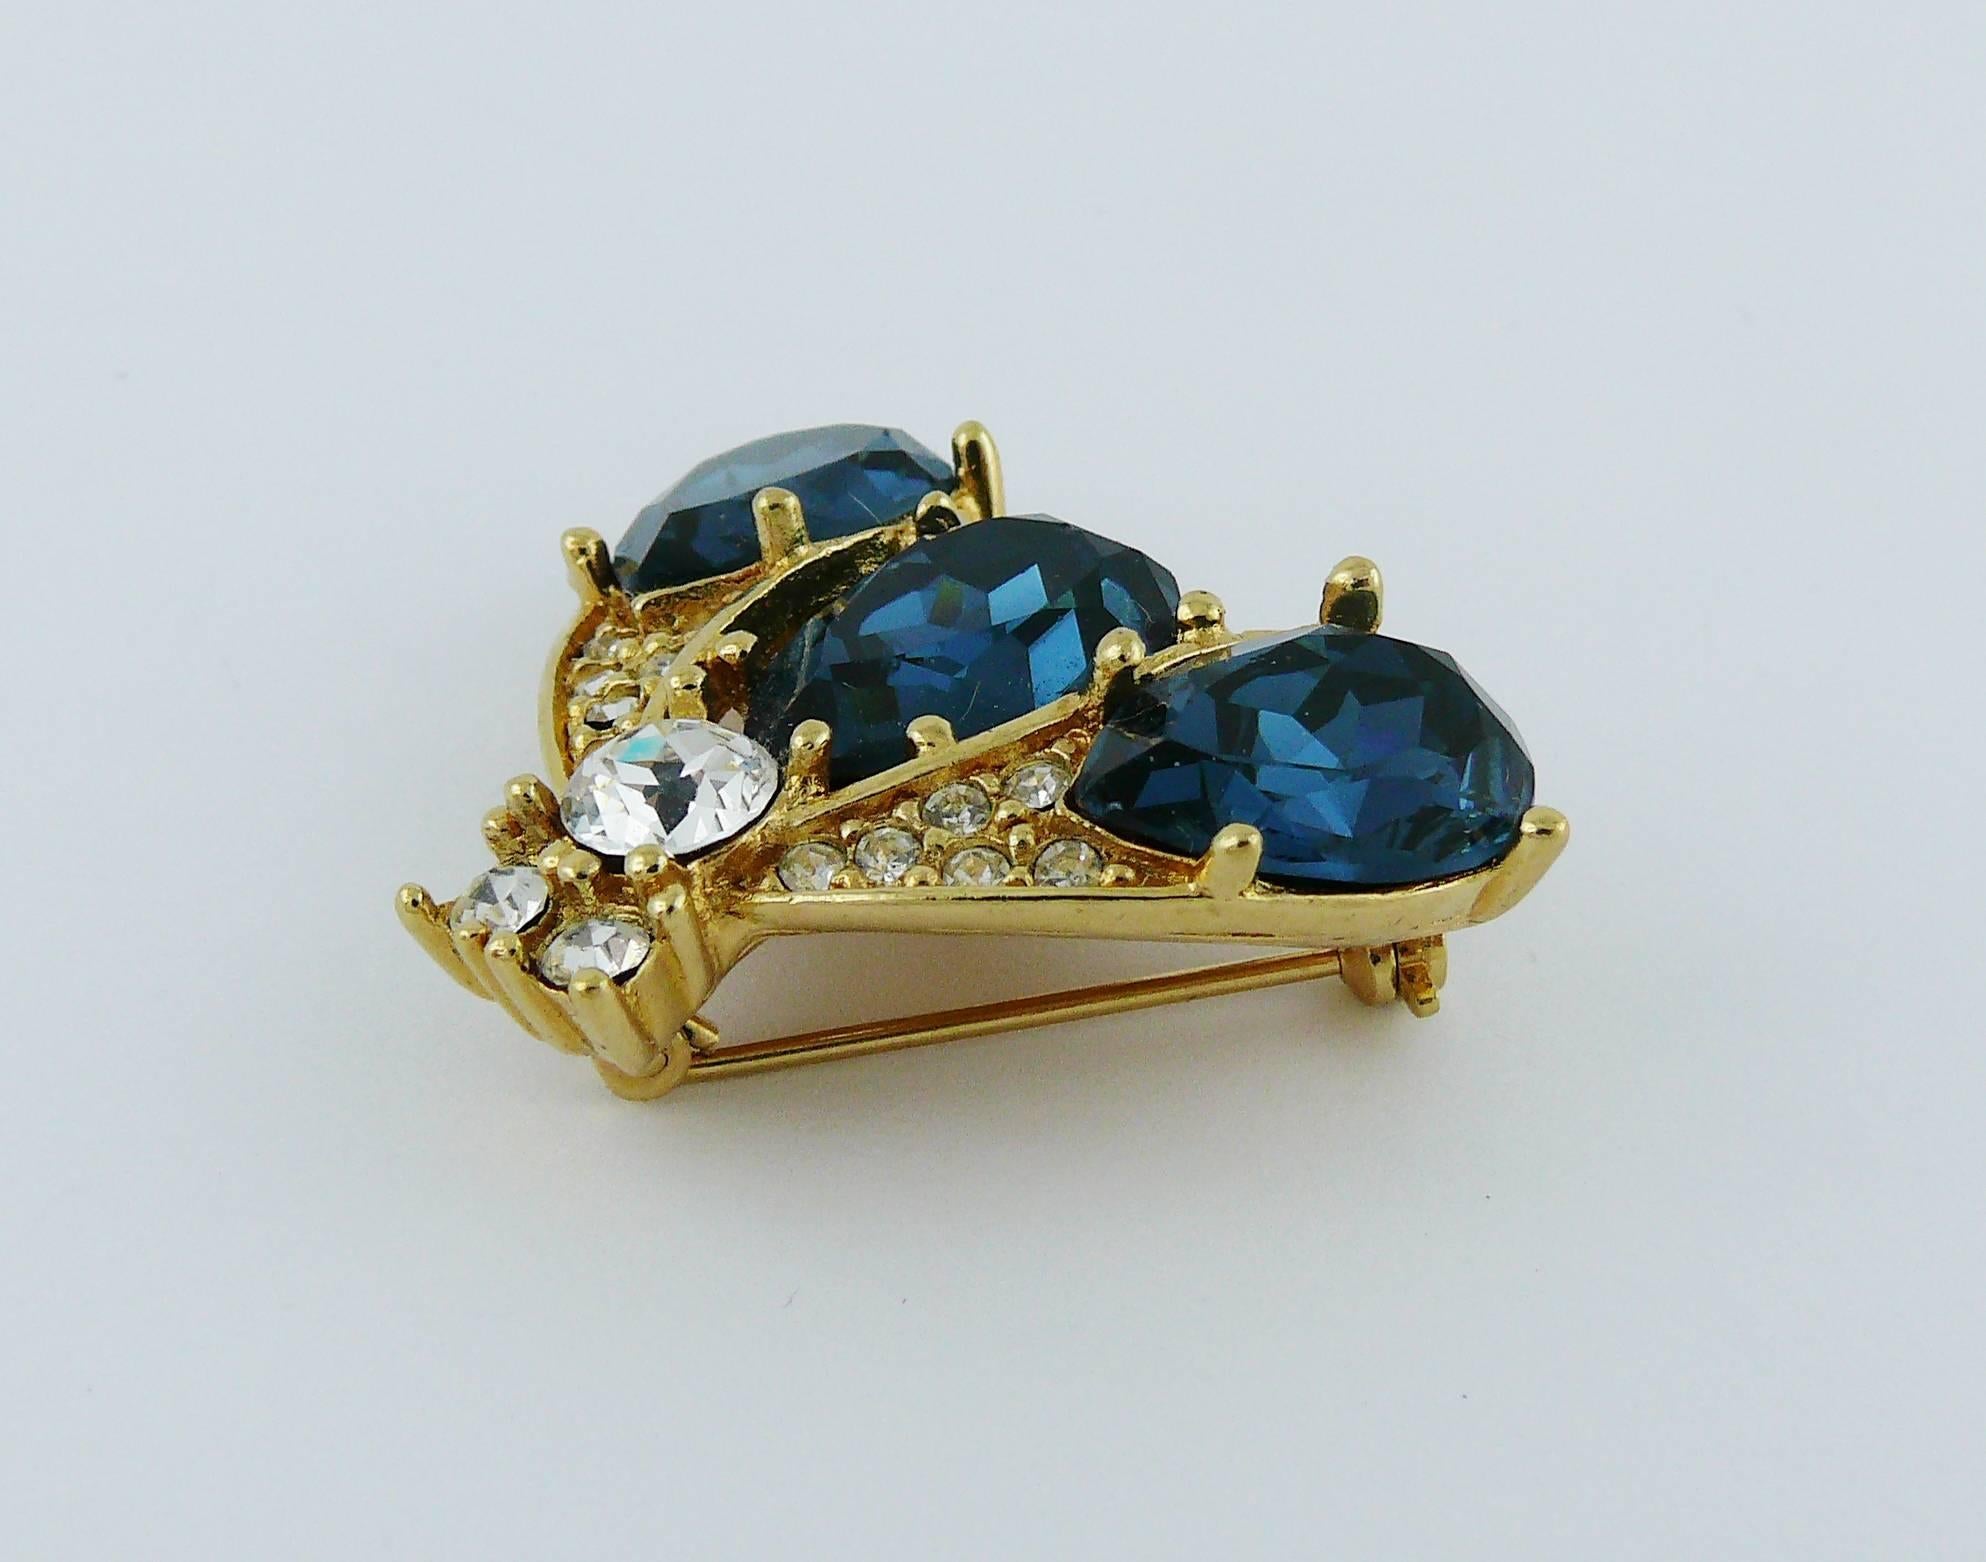 CHRISTIAN DIOR gold toned iconic bee brooch embellished with faux sapphire and clear crystals.

Marked CHRISTIAN DIOR Boutique.

Indicative measurements : approx 2.5 cm x 3.3 cm (0.98 inch x 1.30 inches).

JEWELRY CONDITION CHART
- New or never worn